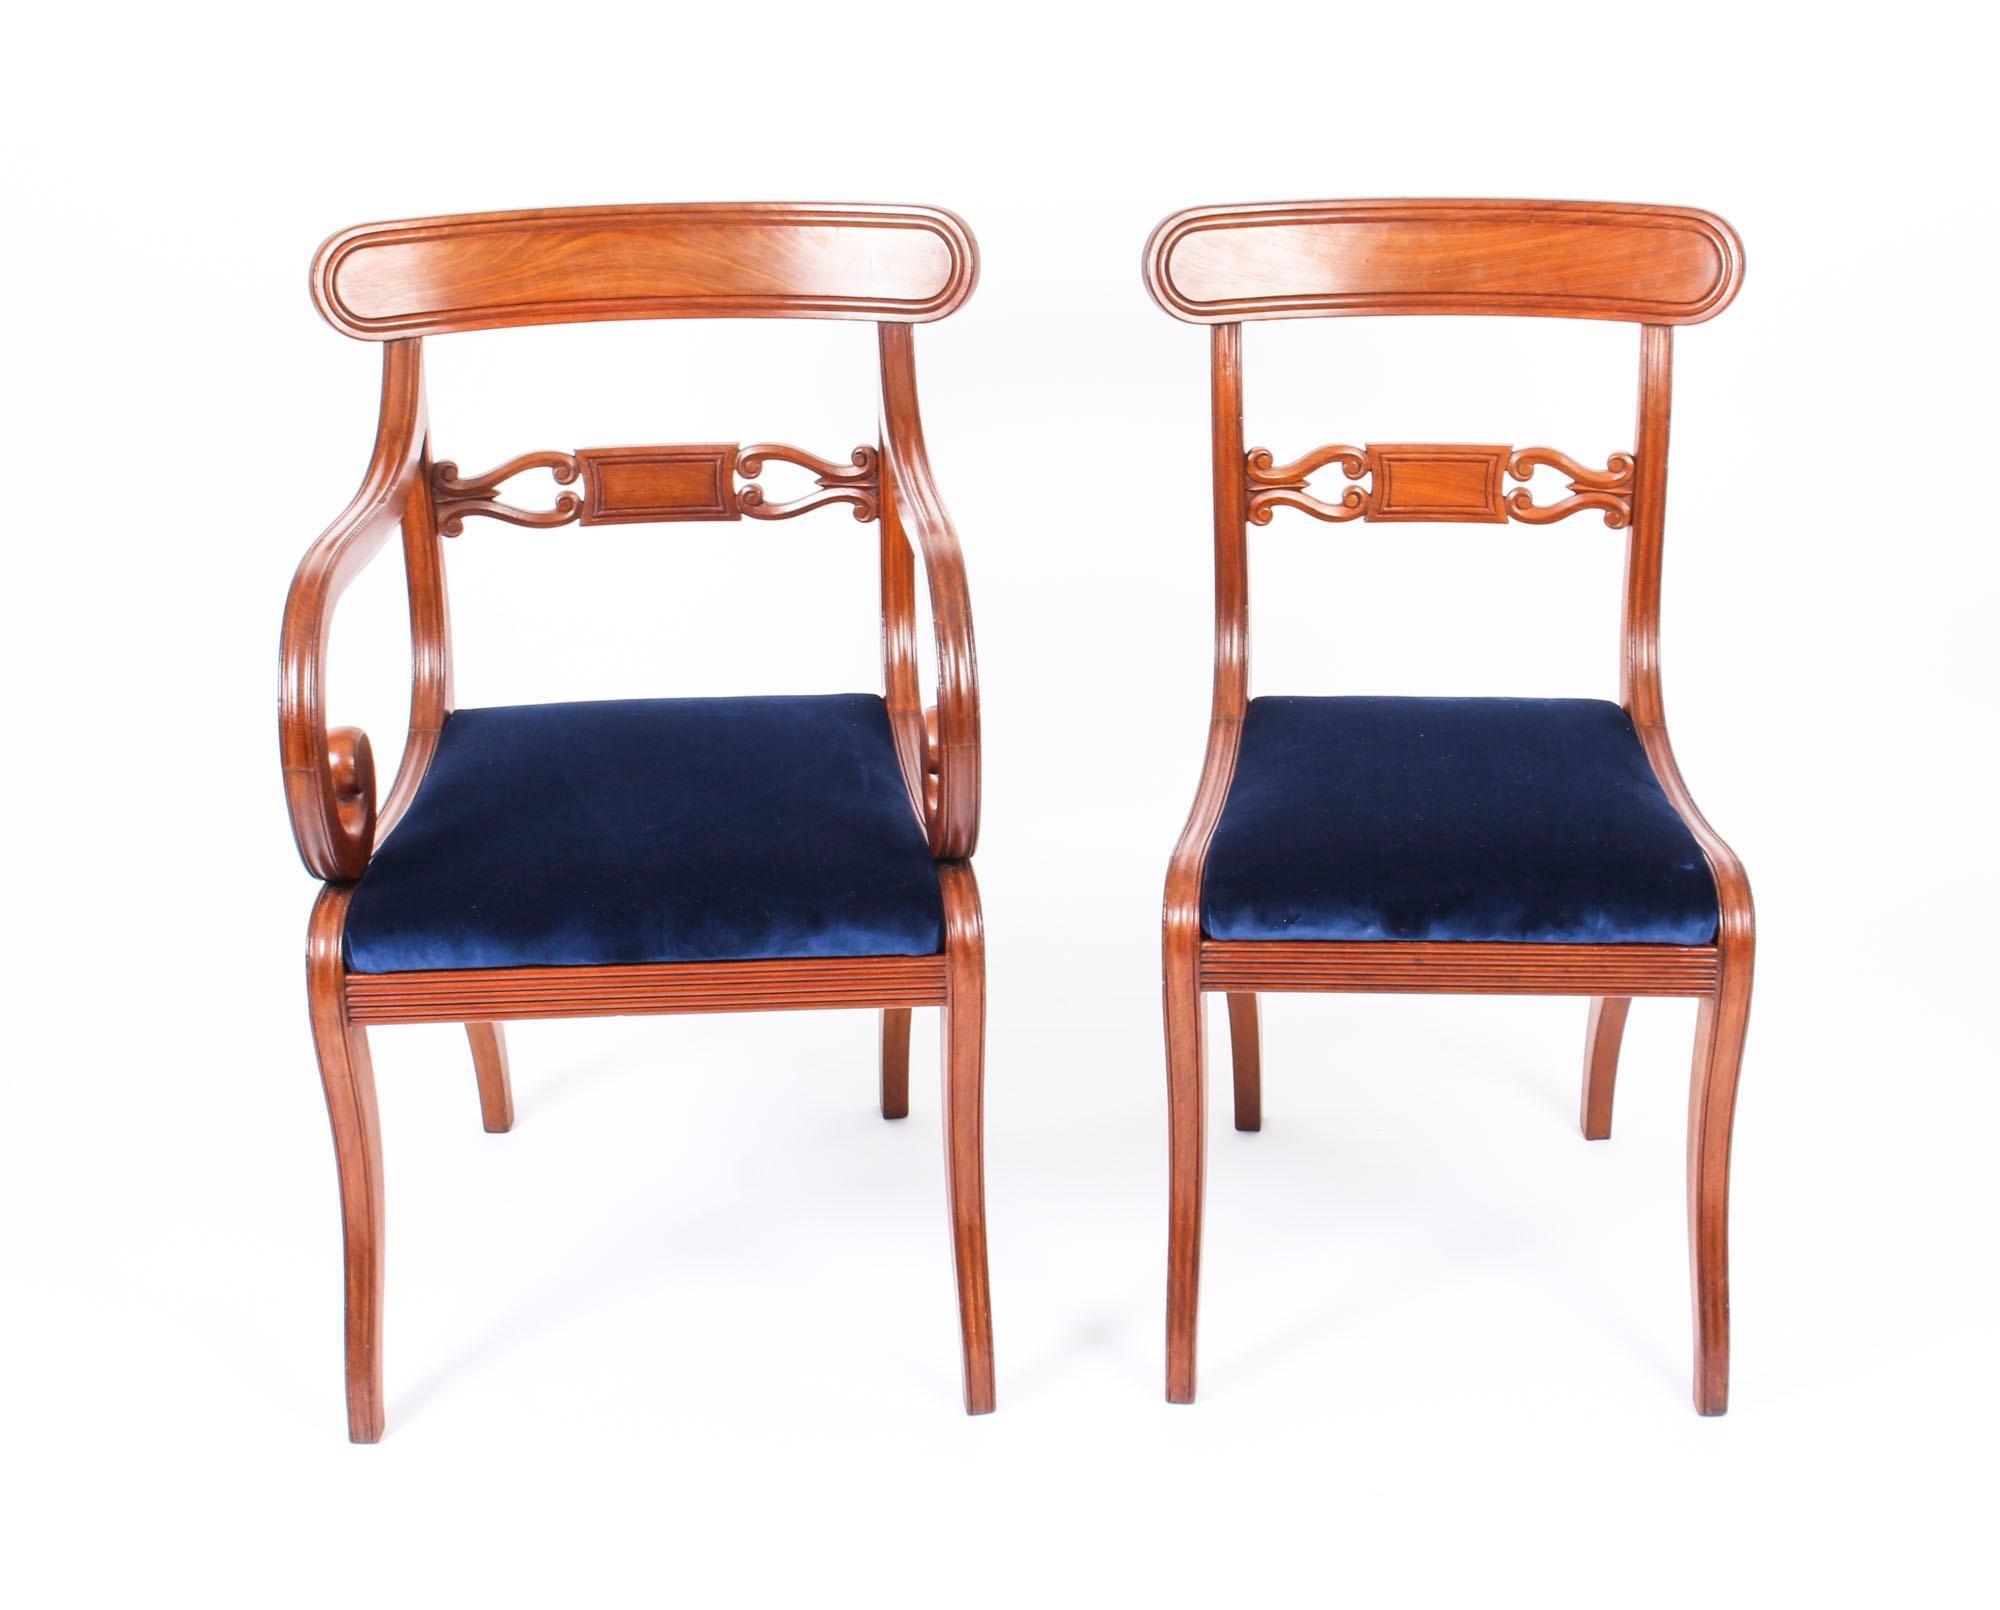 A stunning and rare long set of fourteen antique Regency Period mahogany dining chairs, circa 1820 in date.

The bar back chairs with curved top rails above scrolled horizontal splats. The overstuffed drop in seats above reeded seat rails, they are